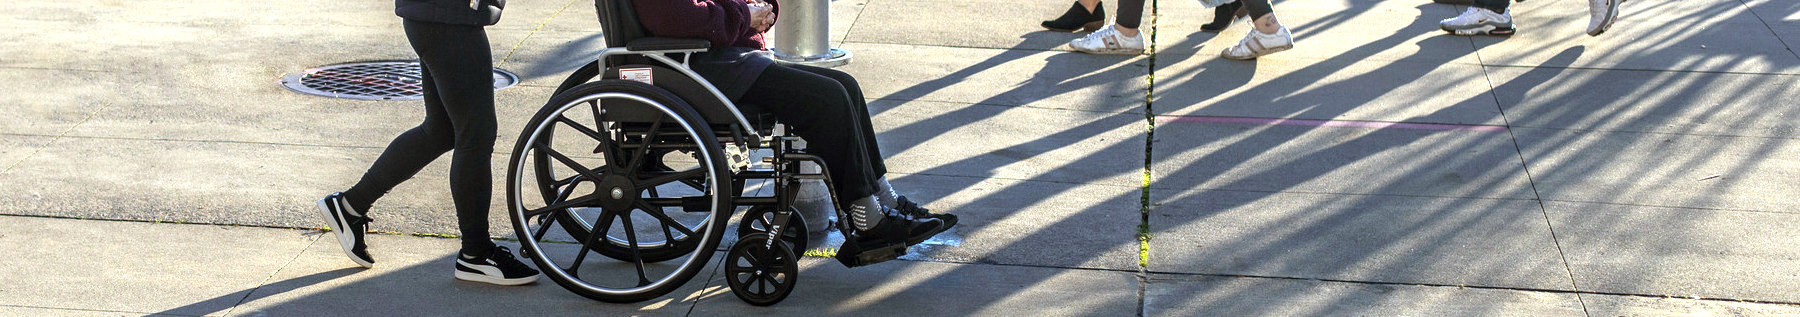 pedestrian and person in wheelchair